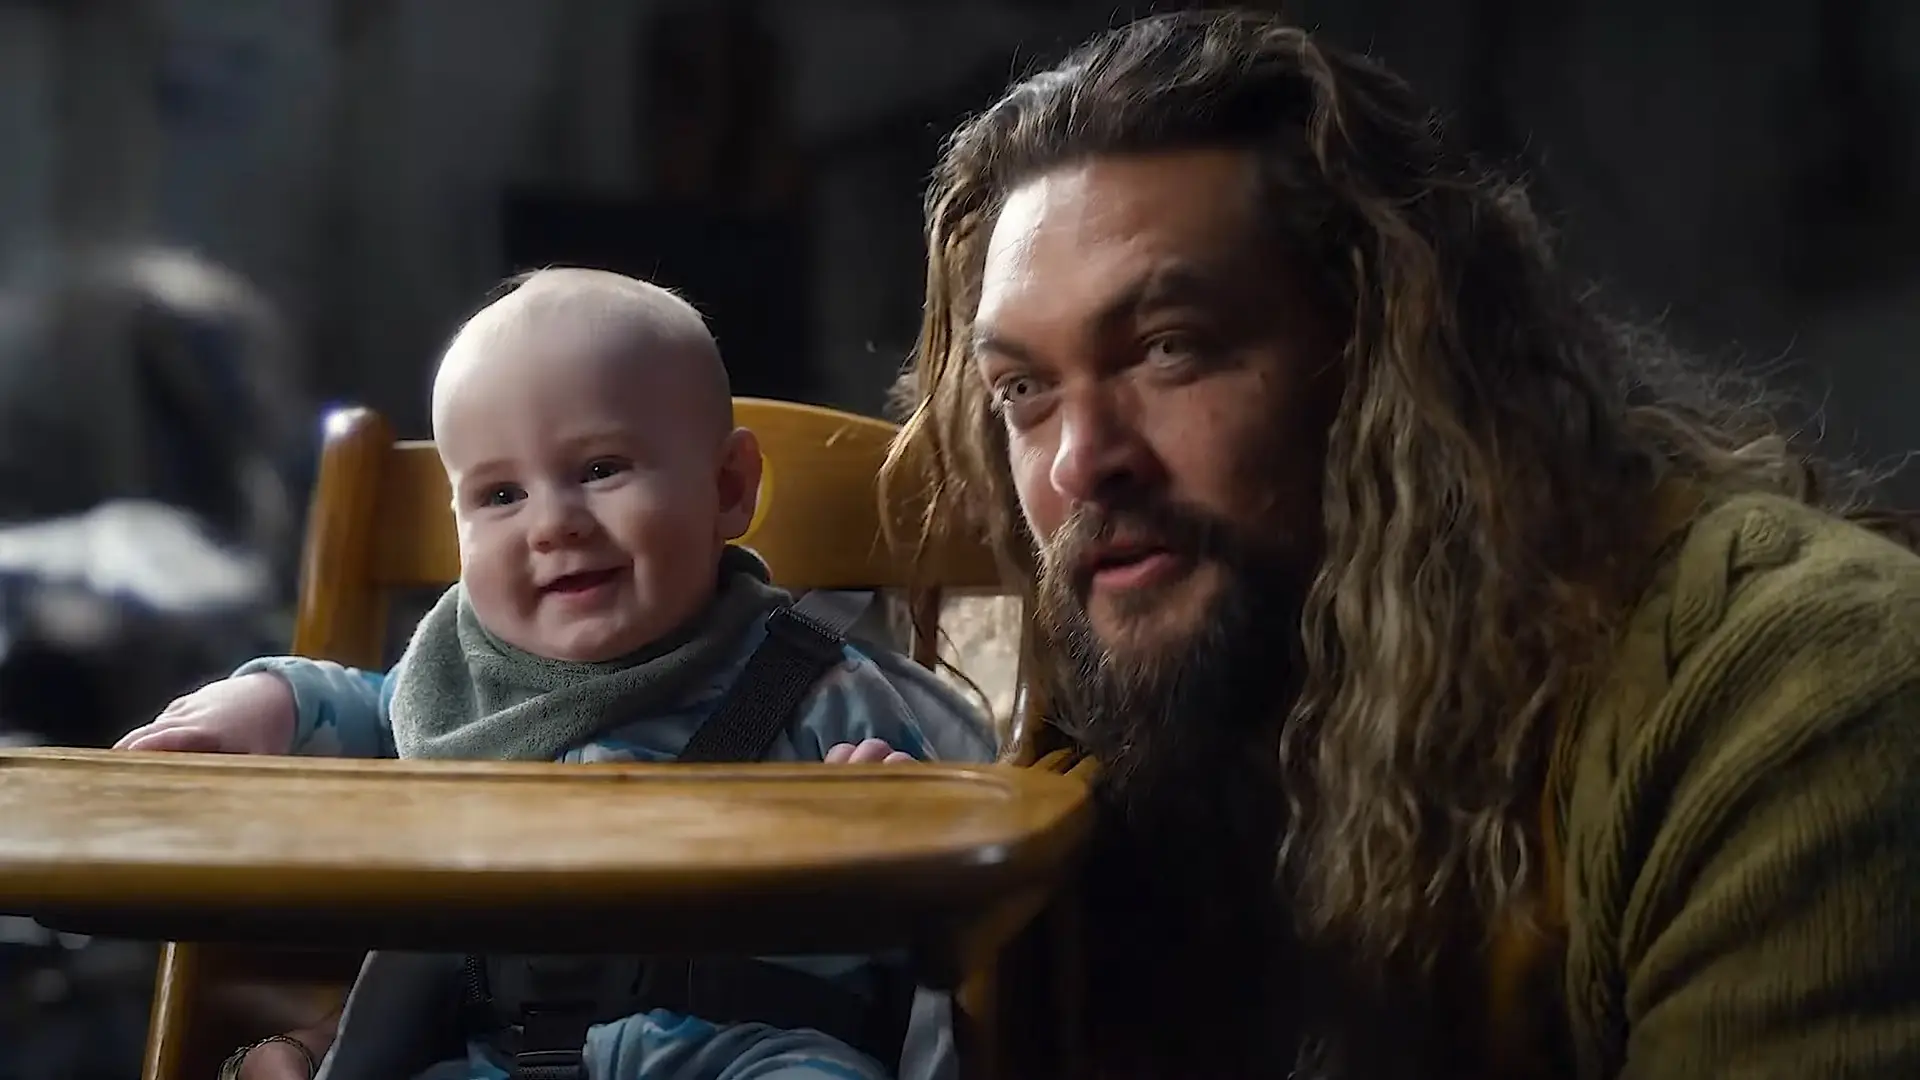 AQUAMAN 2 Trailer 2023.webp removed non useful words cleaned up formatting I hope this helps If you have any other requests feel free to ask